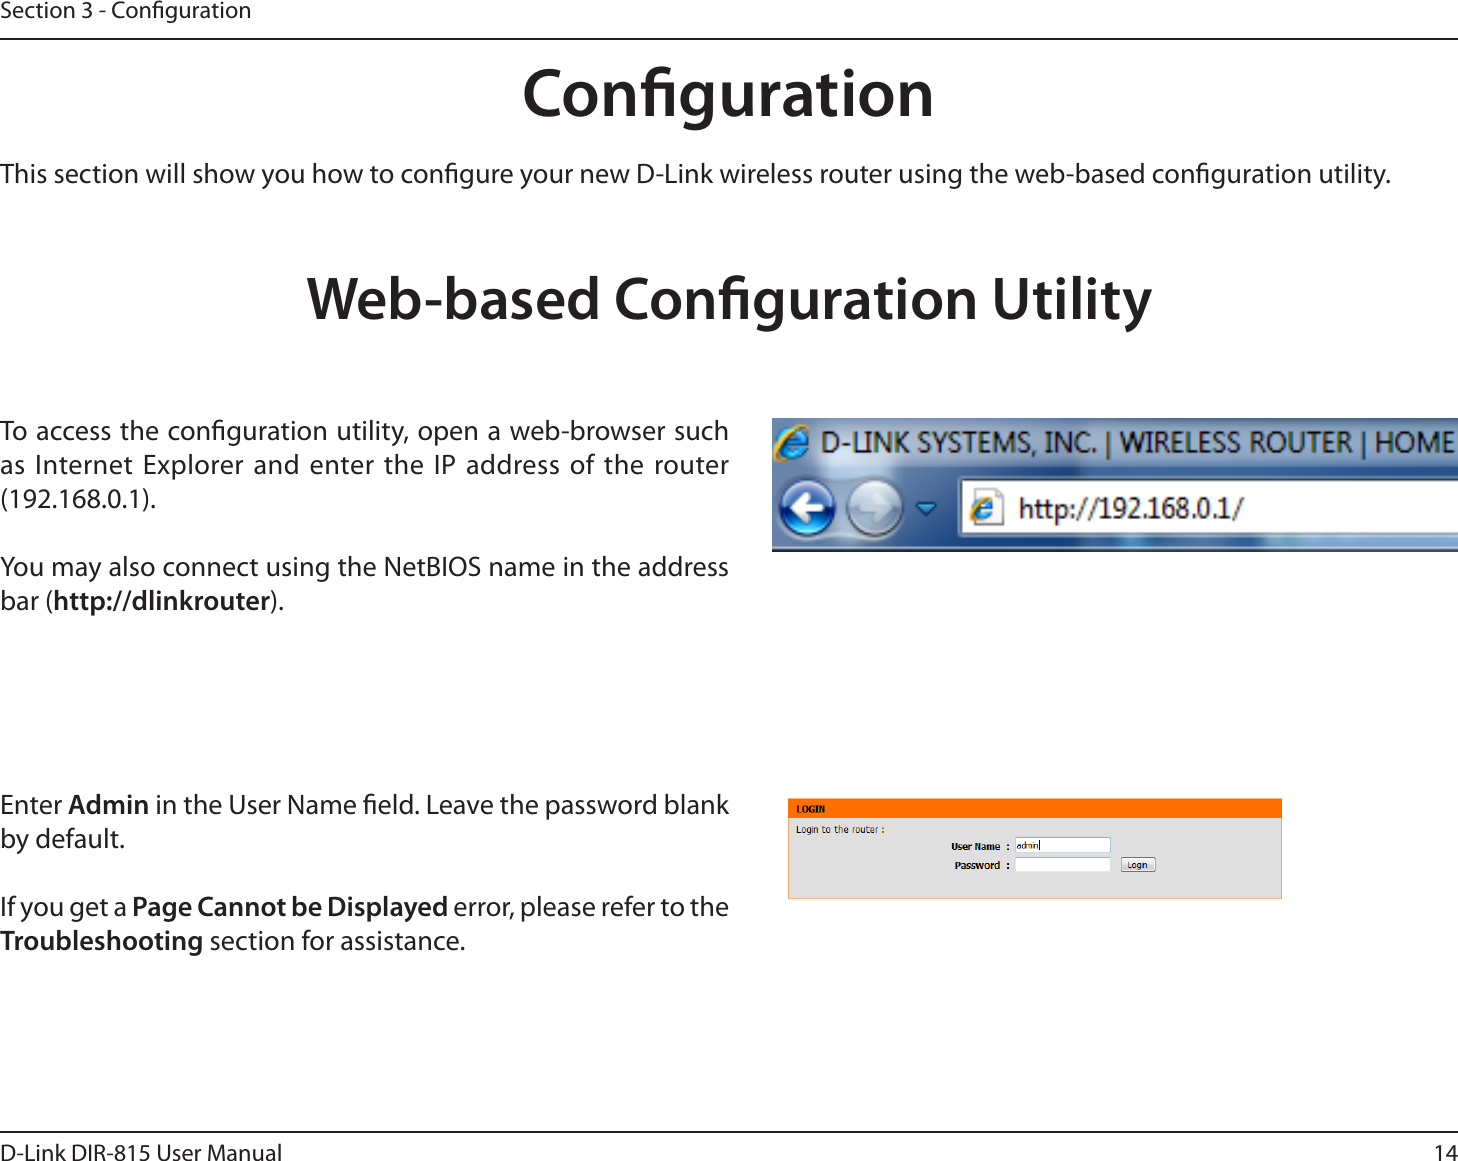 14D-Link DIR-815 User ManualSection 3 - CongurationCongurationThis section will show you how to congure your new D-Link wireless router using the web-based conguration utility.Web-based Conguration UtilityTo access the conguration utility, open a web-browser such as Internet Explorer and enter the IP address of the router (192.168.0.1).:PVNBZBMTPDPOOFDUVTJOHUIF/FU#*04OBNFJOUIFBEESFTTbar (http://dlinkrouter).Enter Admin in the User Name eld. Leave the password blank by default. If you get a Page Cannot be Displayed error, please refer to the Troubleshooting section for assistance.